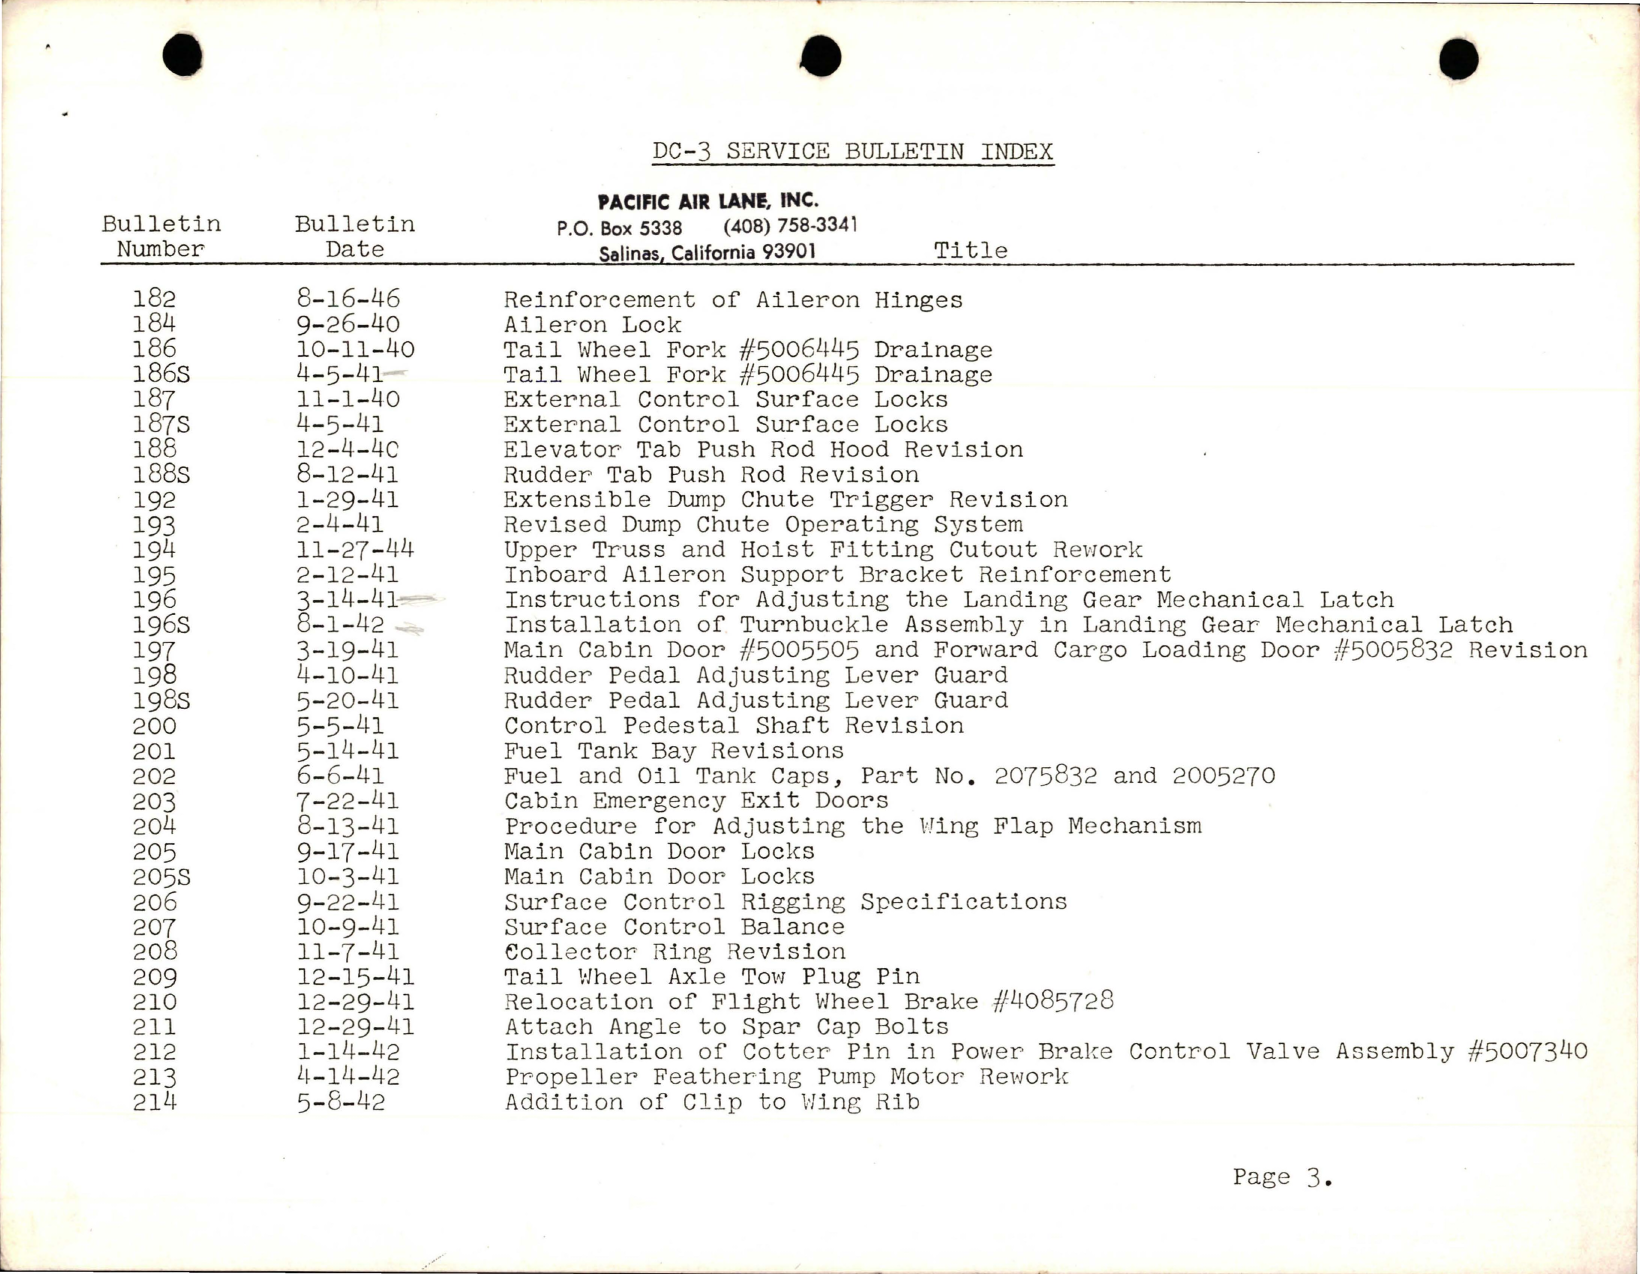 Sample page 5 from AirCorps Library document: Service Bulletin Index for DC-3